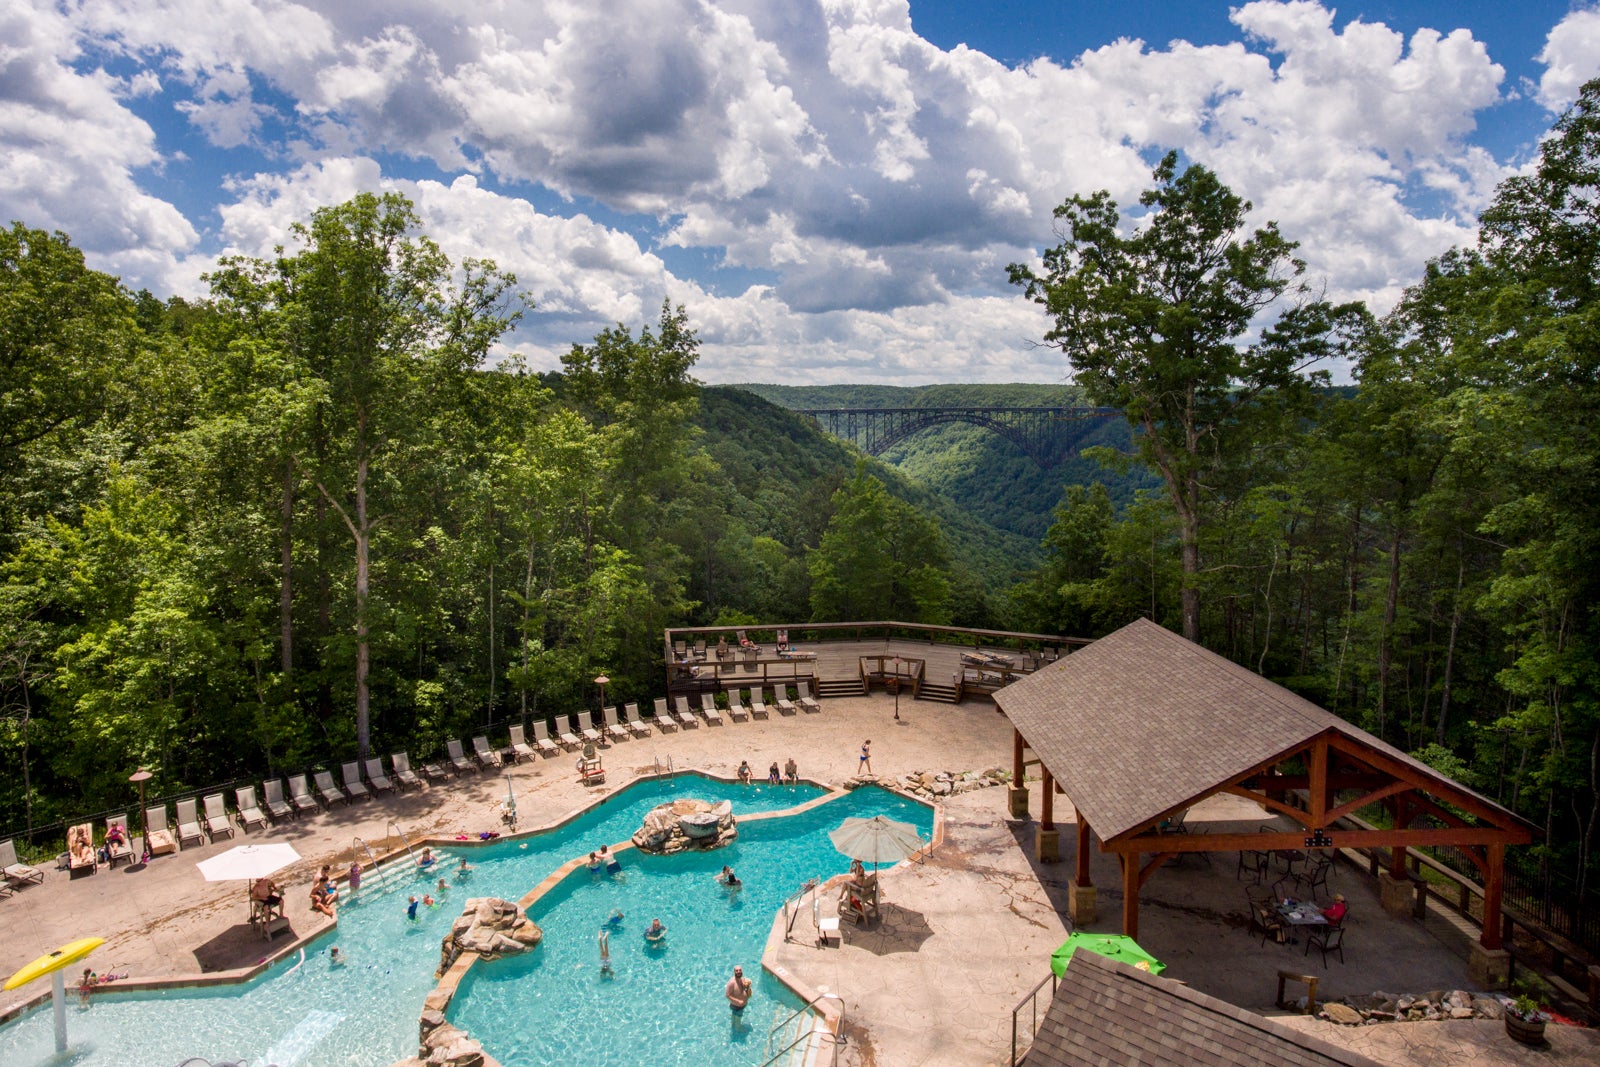 Pool at Adventures on the Gorge